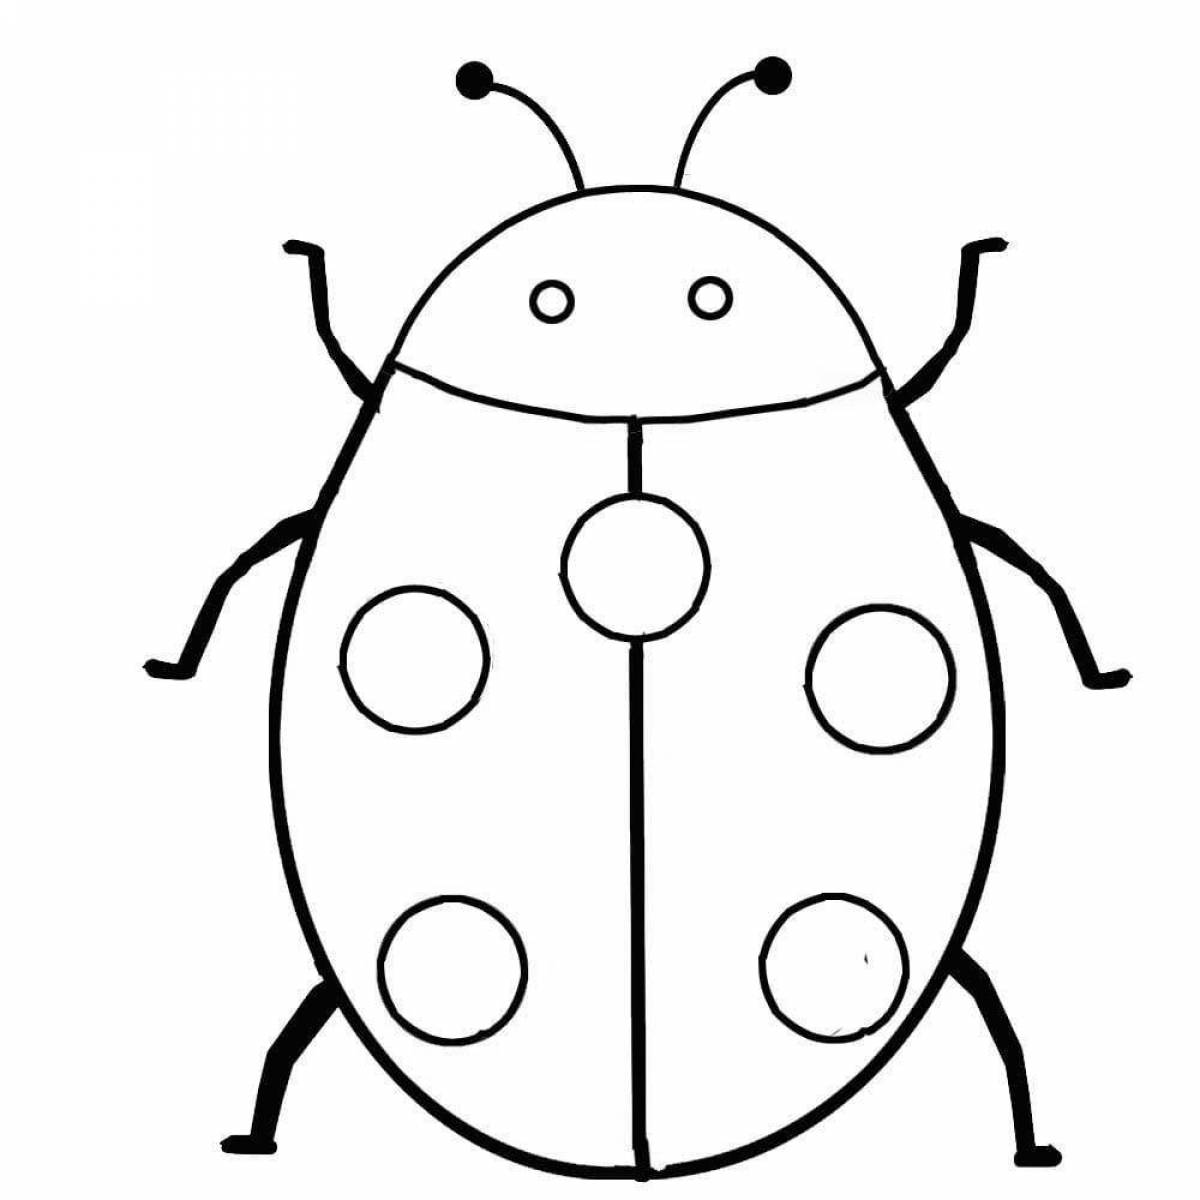 Fun coloring book of a ladybug for 3-4 year olds